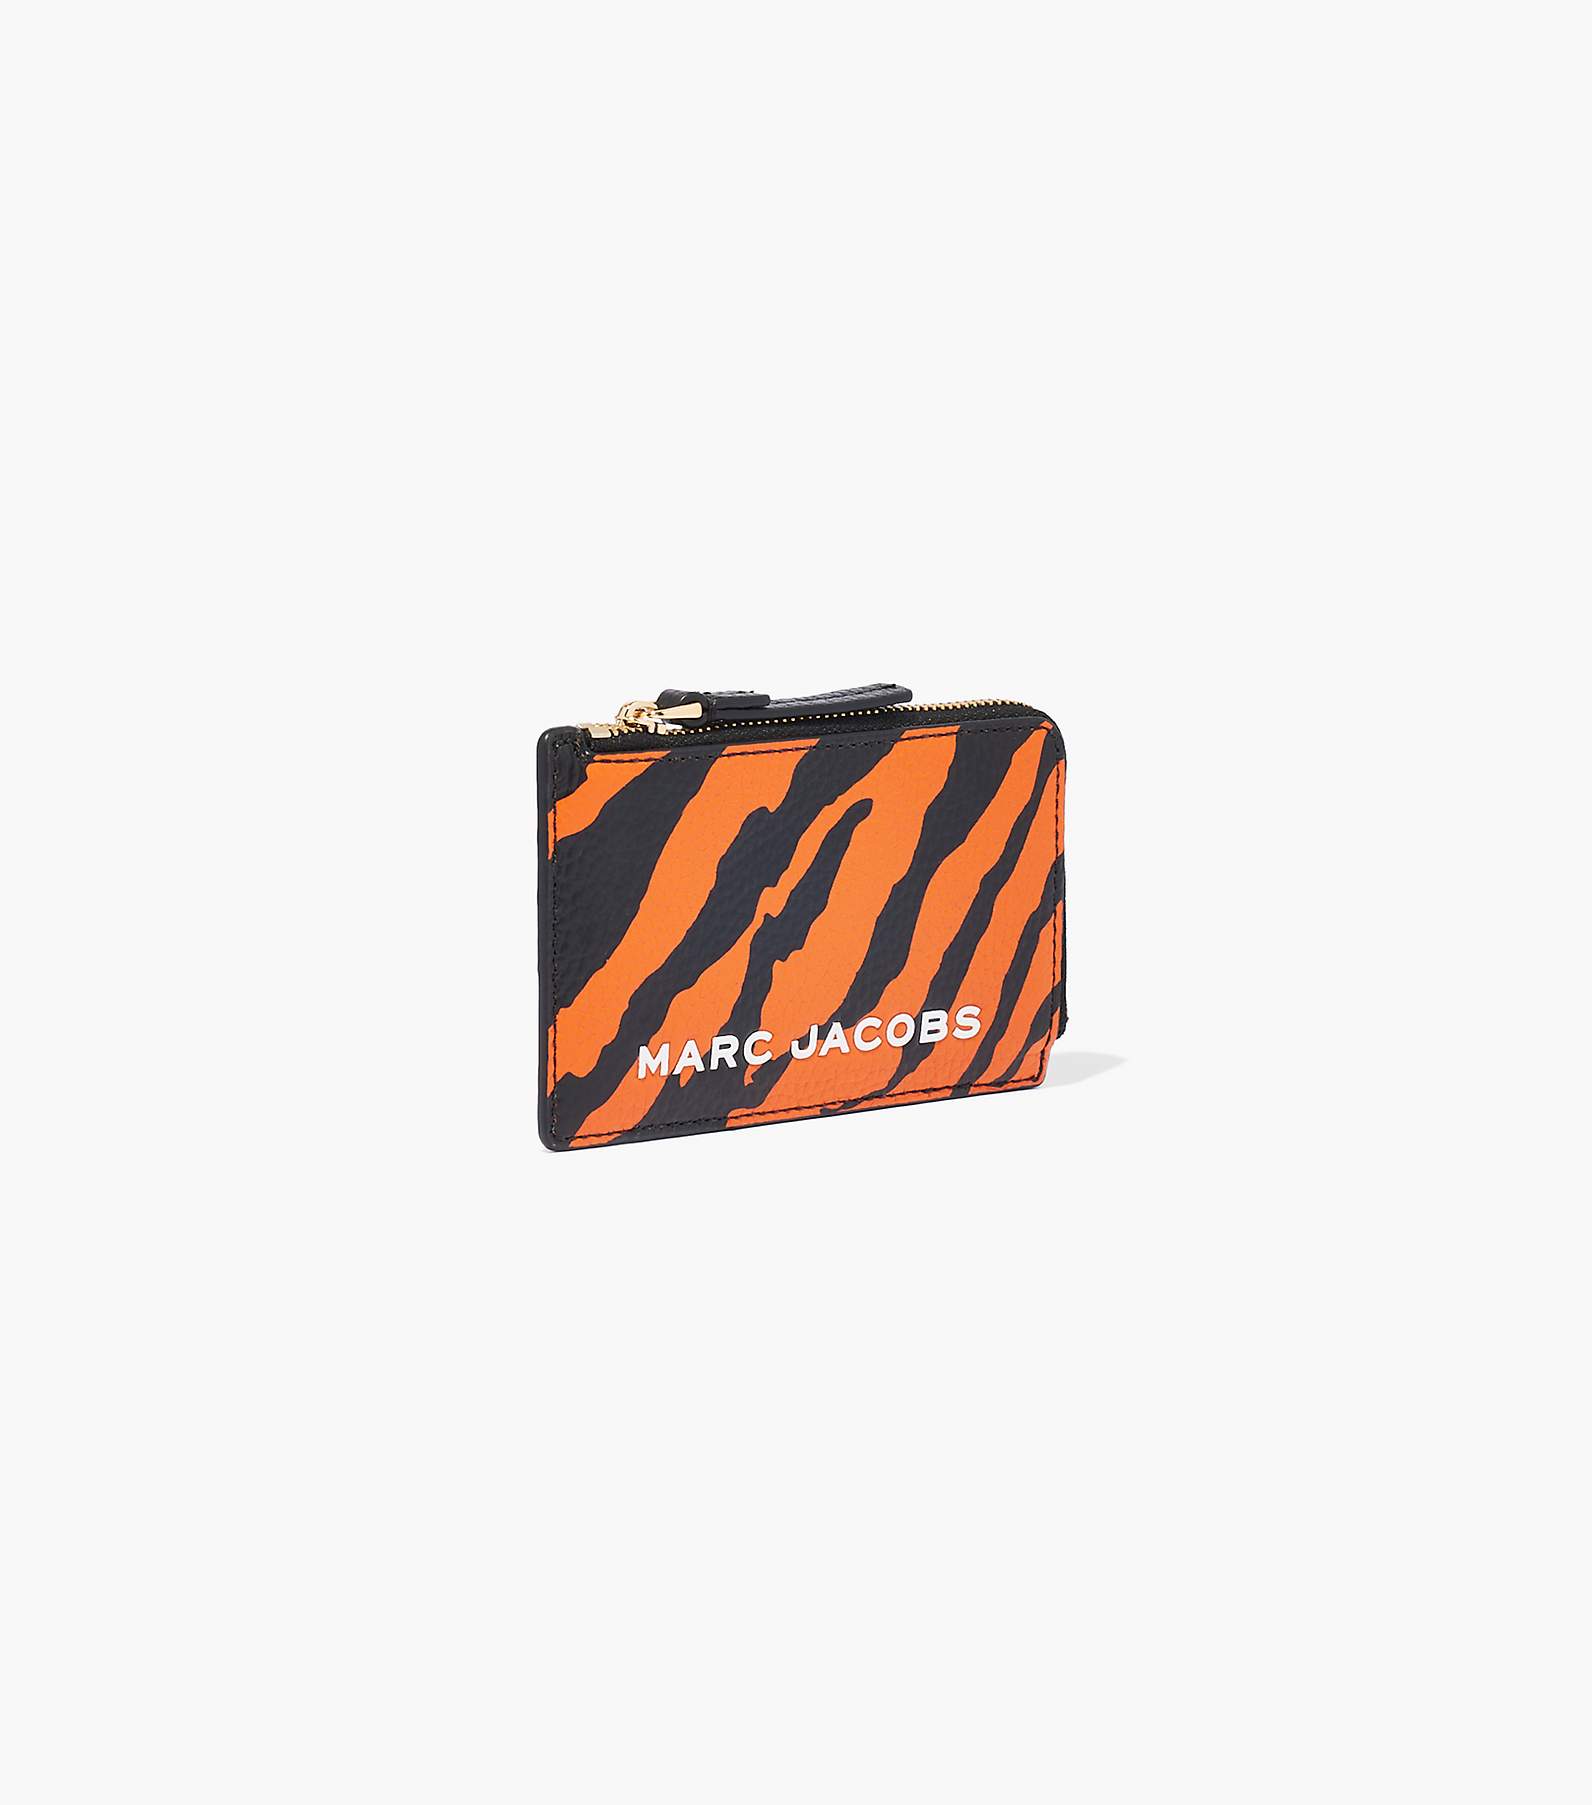 MARC JACOBS: The Tote Bag bag with tiger pattern - Orange